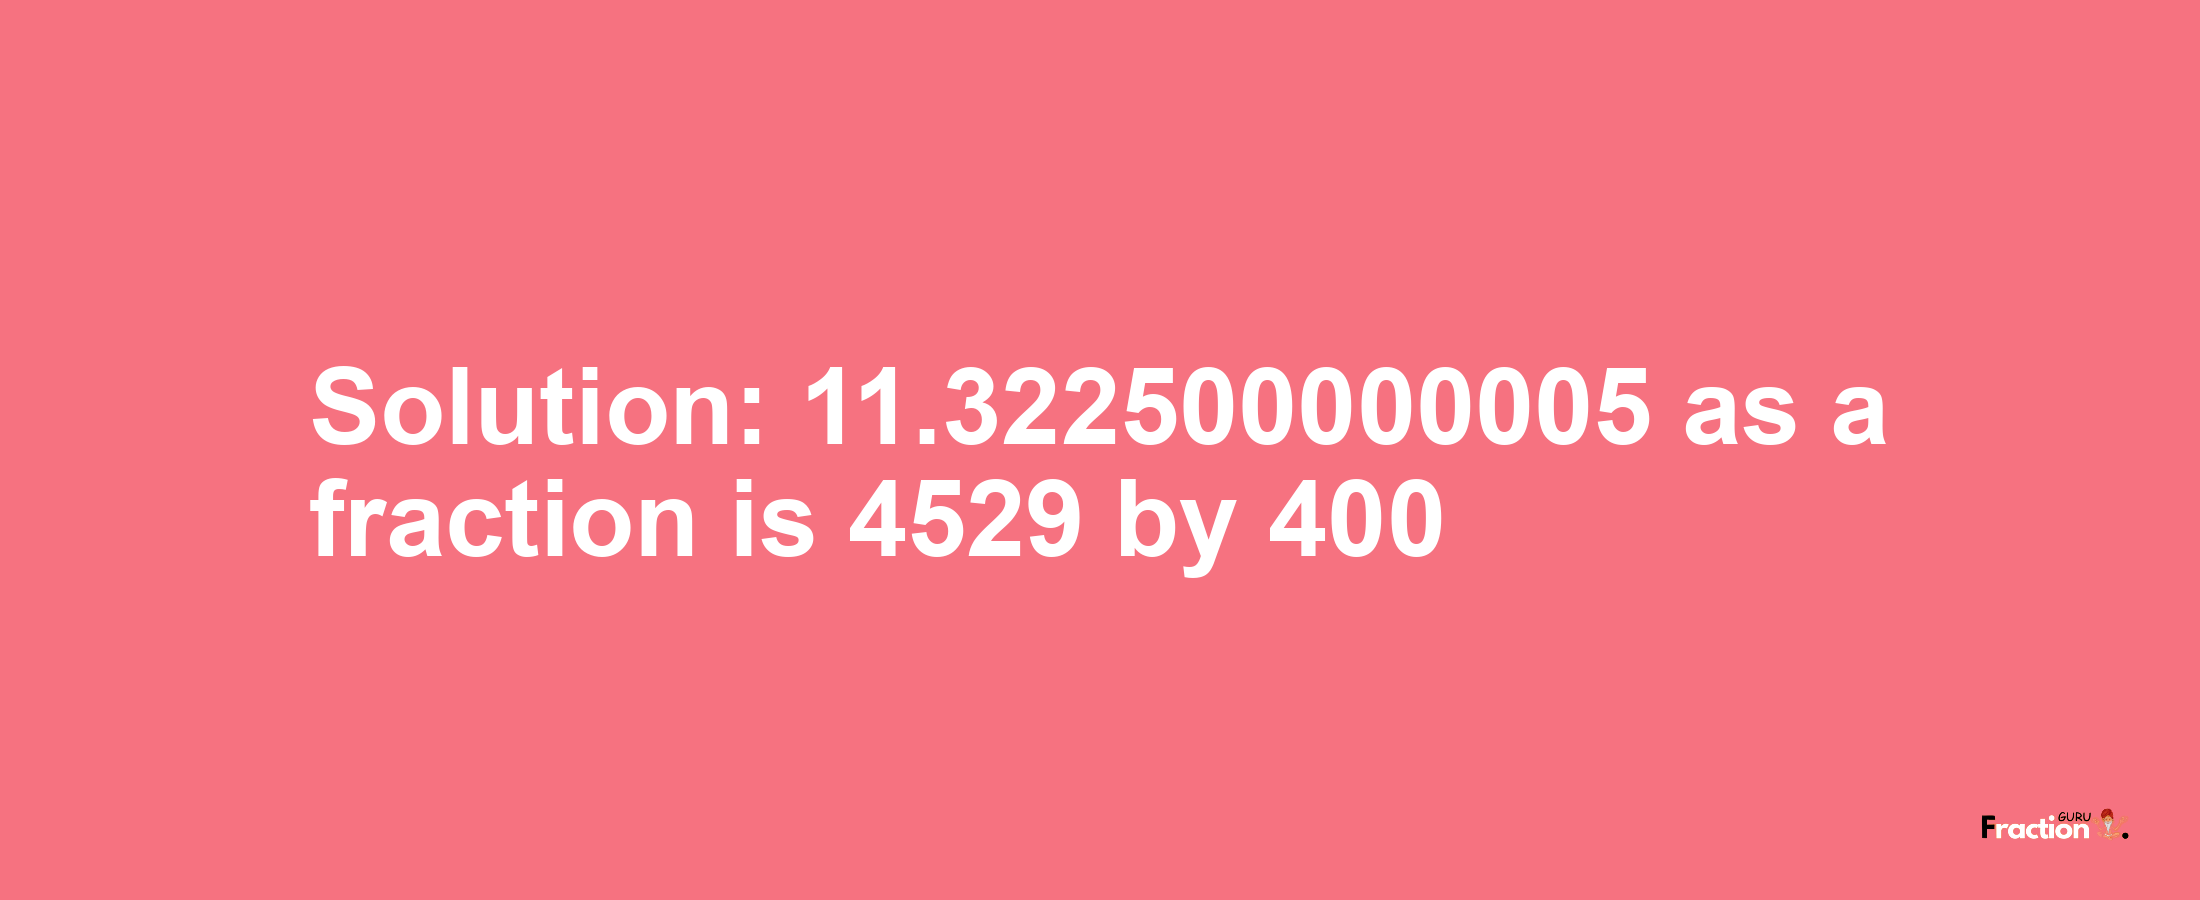 Solution:11.322500000005 as a fraction is 4529/400